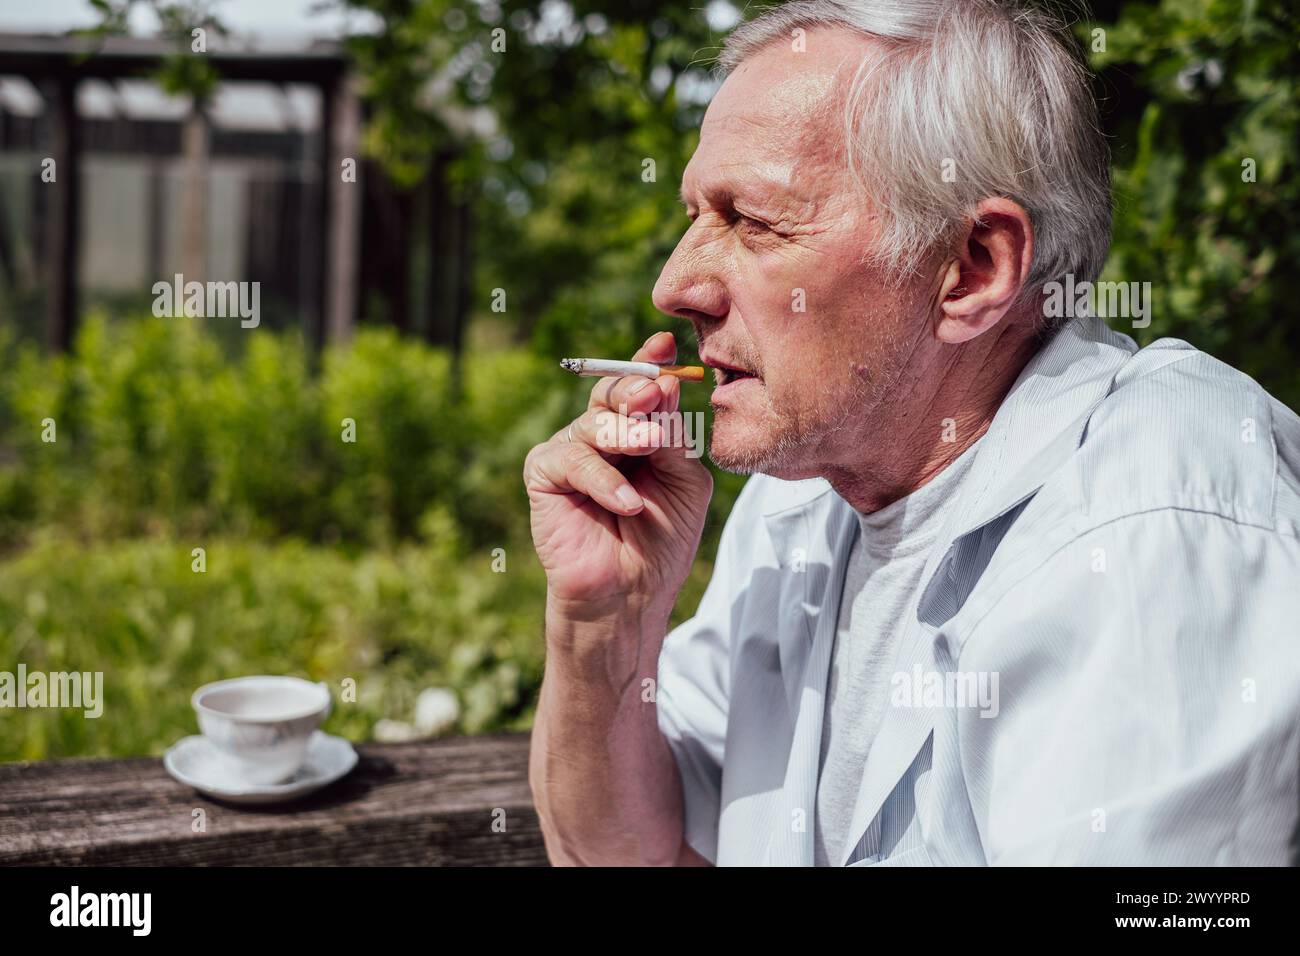 Amidst the tranquility of green surroundings, an aged man savors a cigarette, reflecting on the complexities of old age and habits, addictions. High q Stock Photo